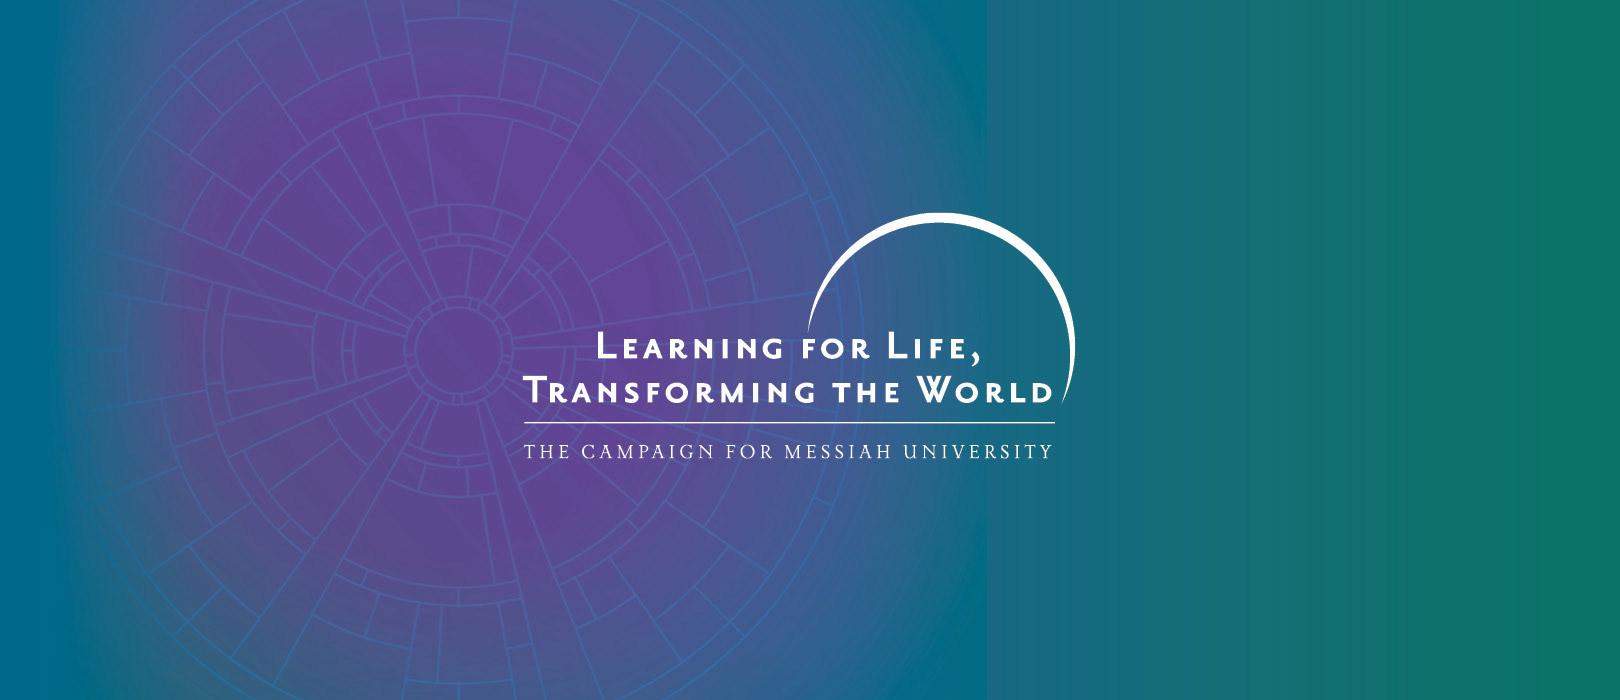 Campaign for Messiah University, visit the donation page